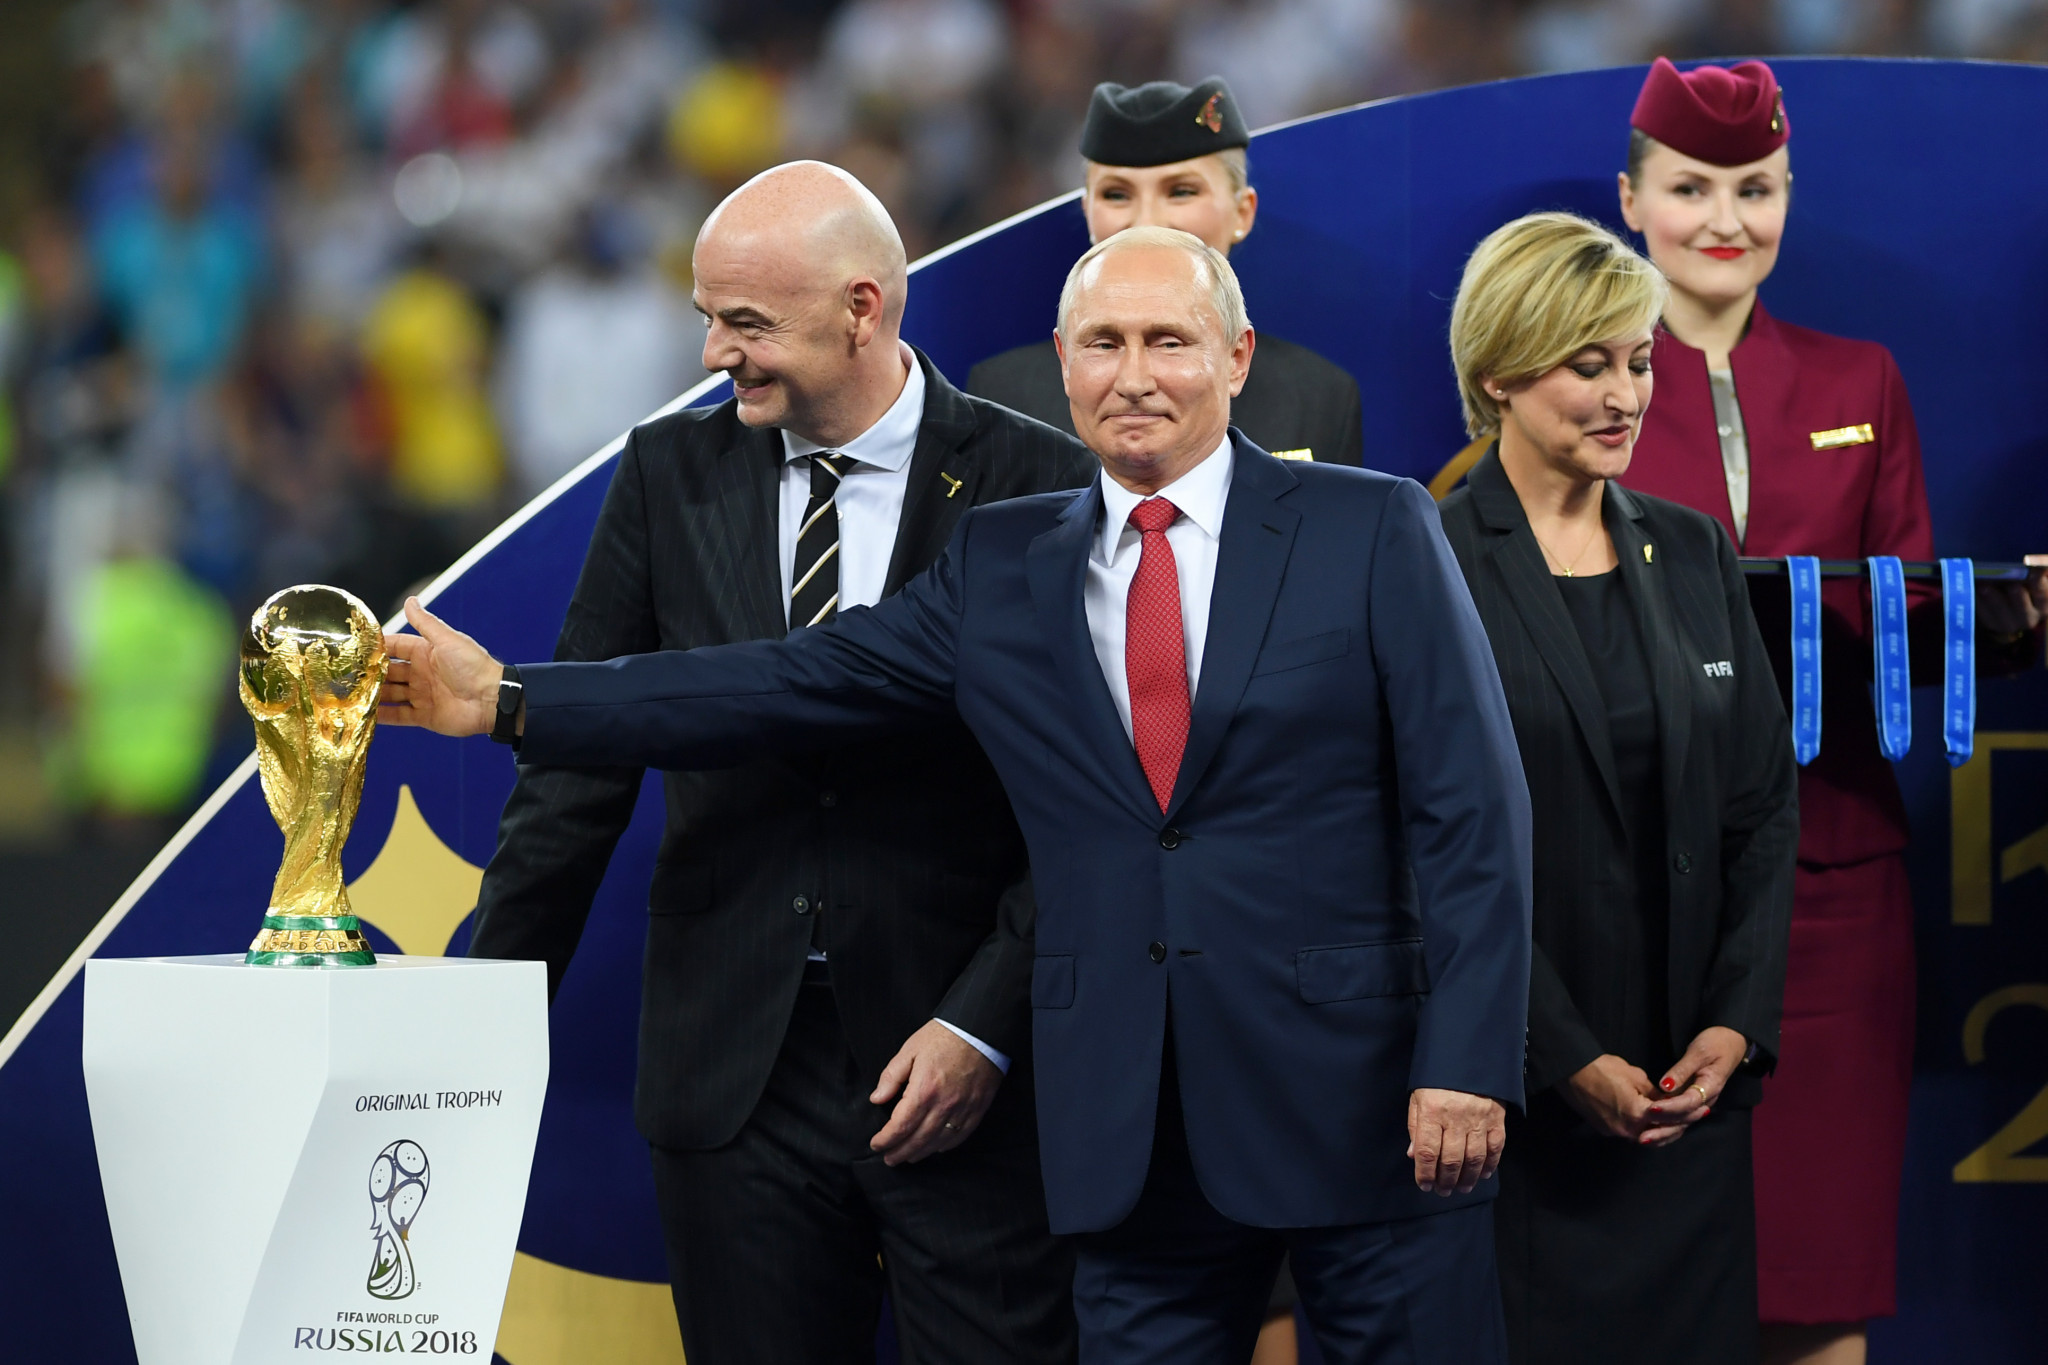 FIFA President Gianni Infantino, left, declared the World Cup in Russia as the 